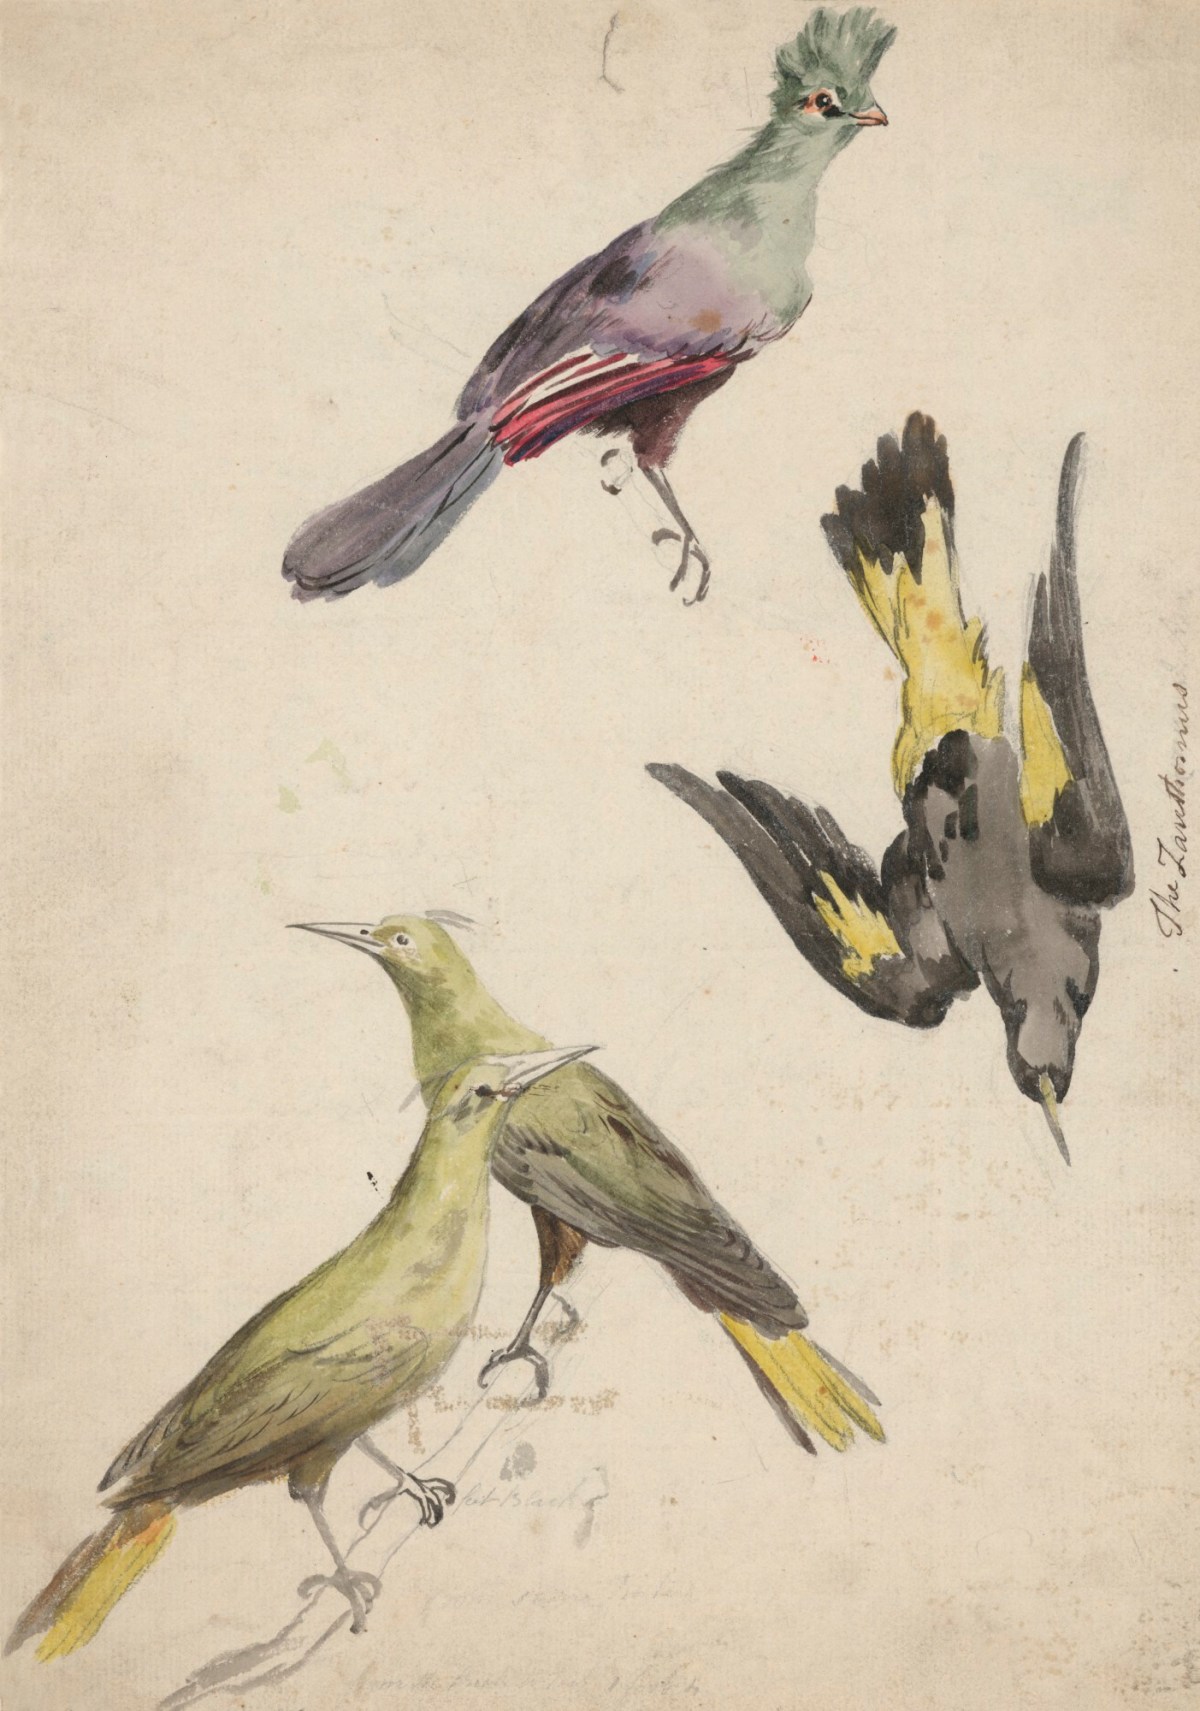 Four studies of birds | Works of Art | RA Collection | Royal Academy of Arts